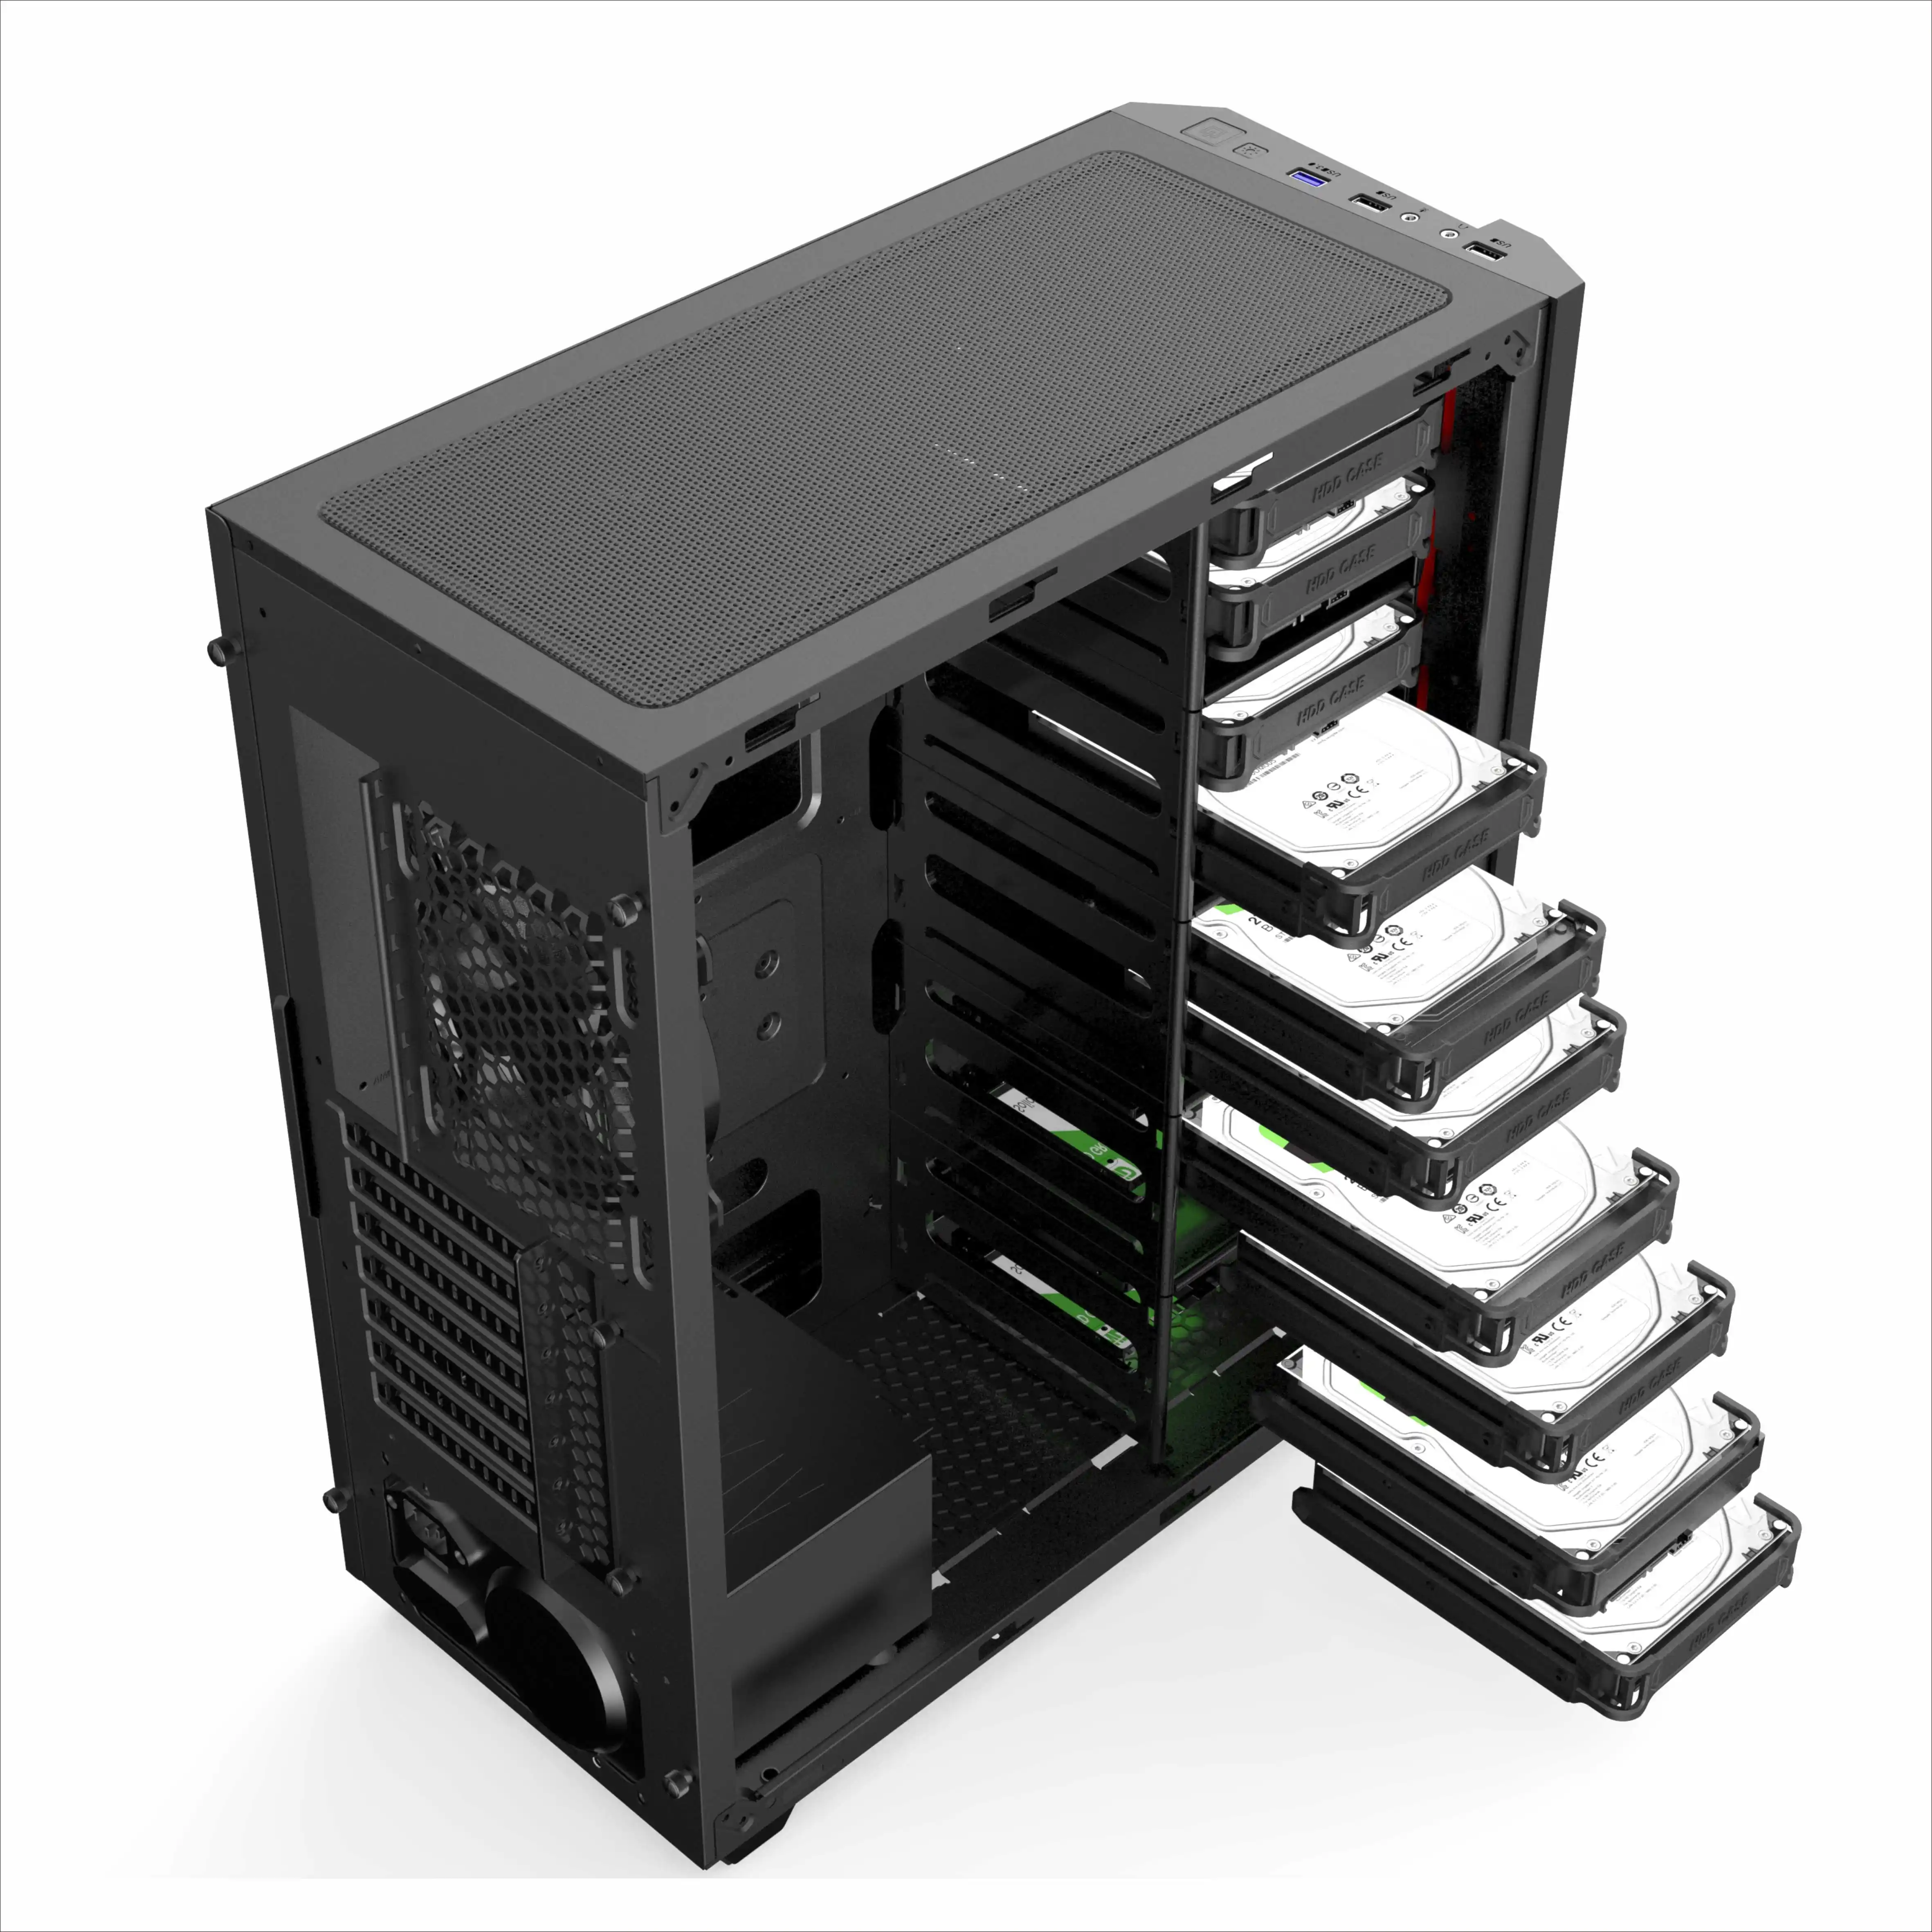 ATX Chassis Case Support 10 HDD bays Server Chassis Rack Mount Chassis Storage Case